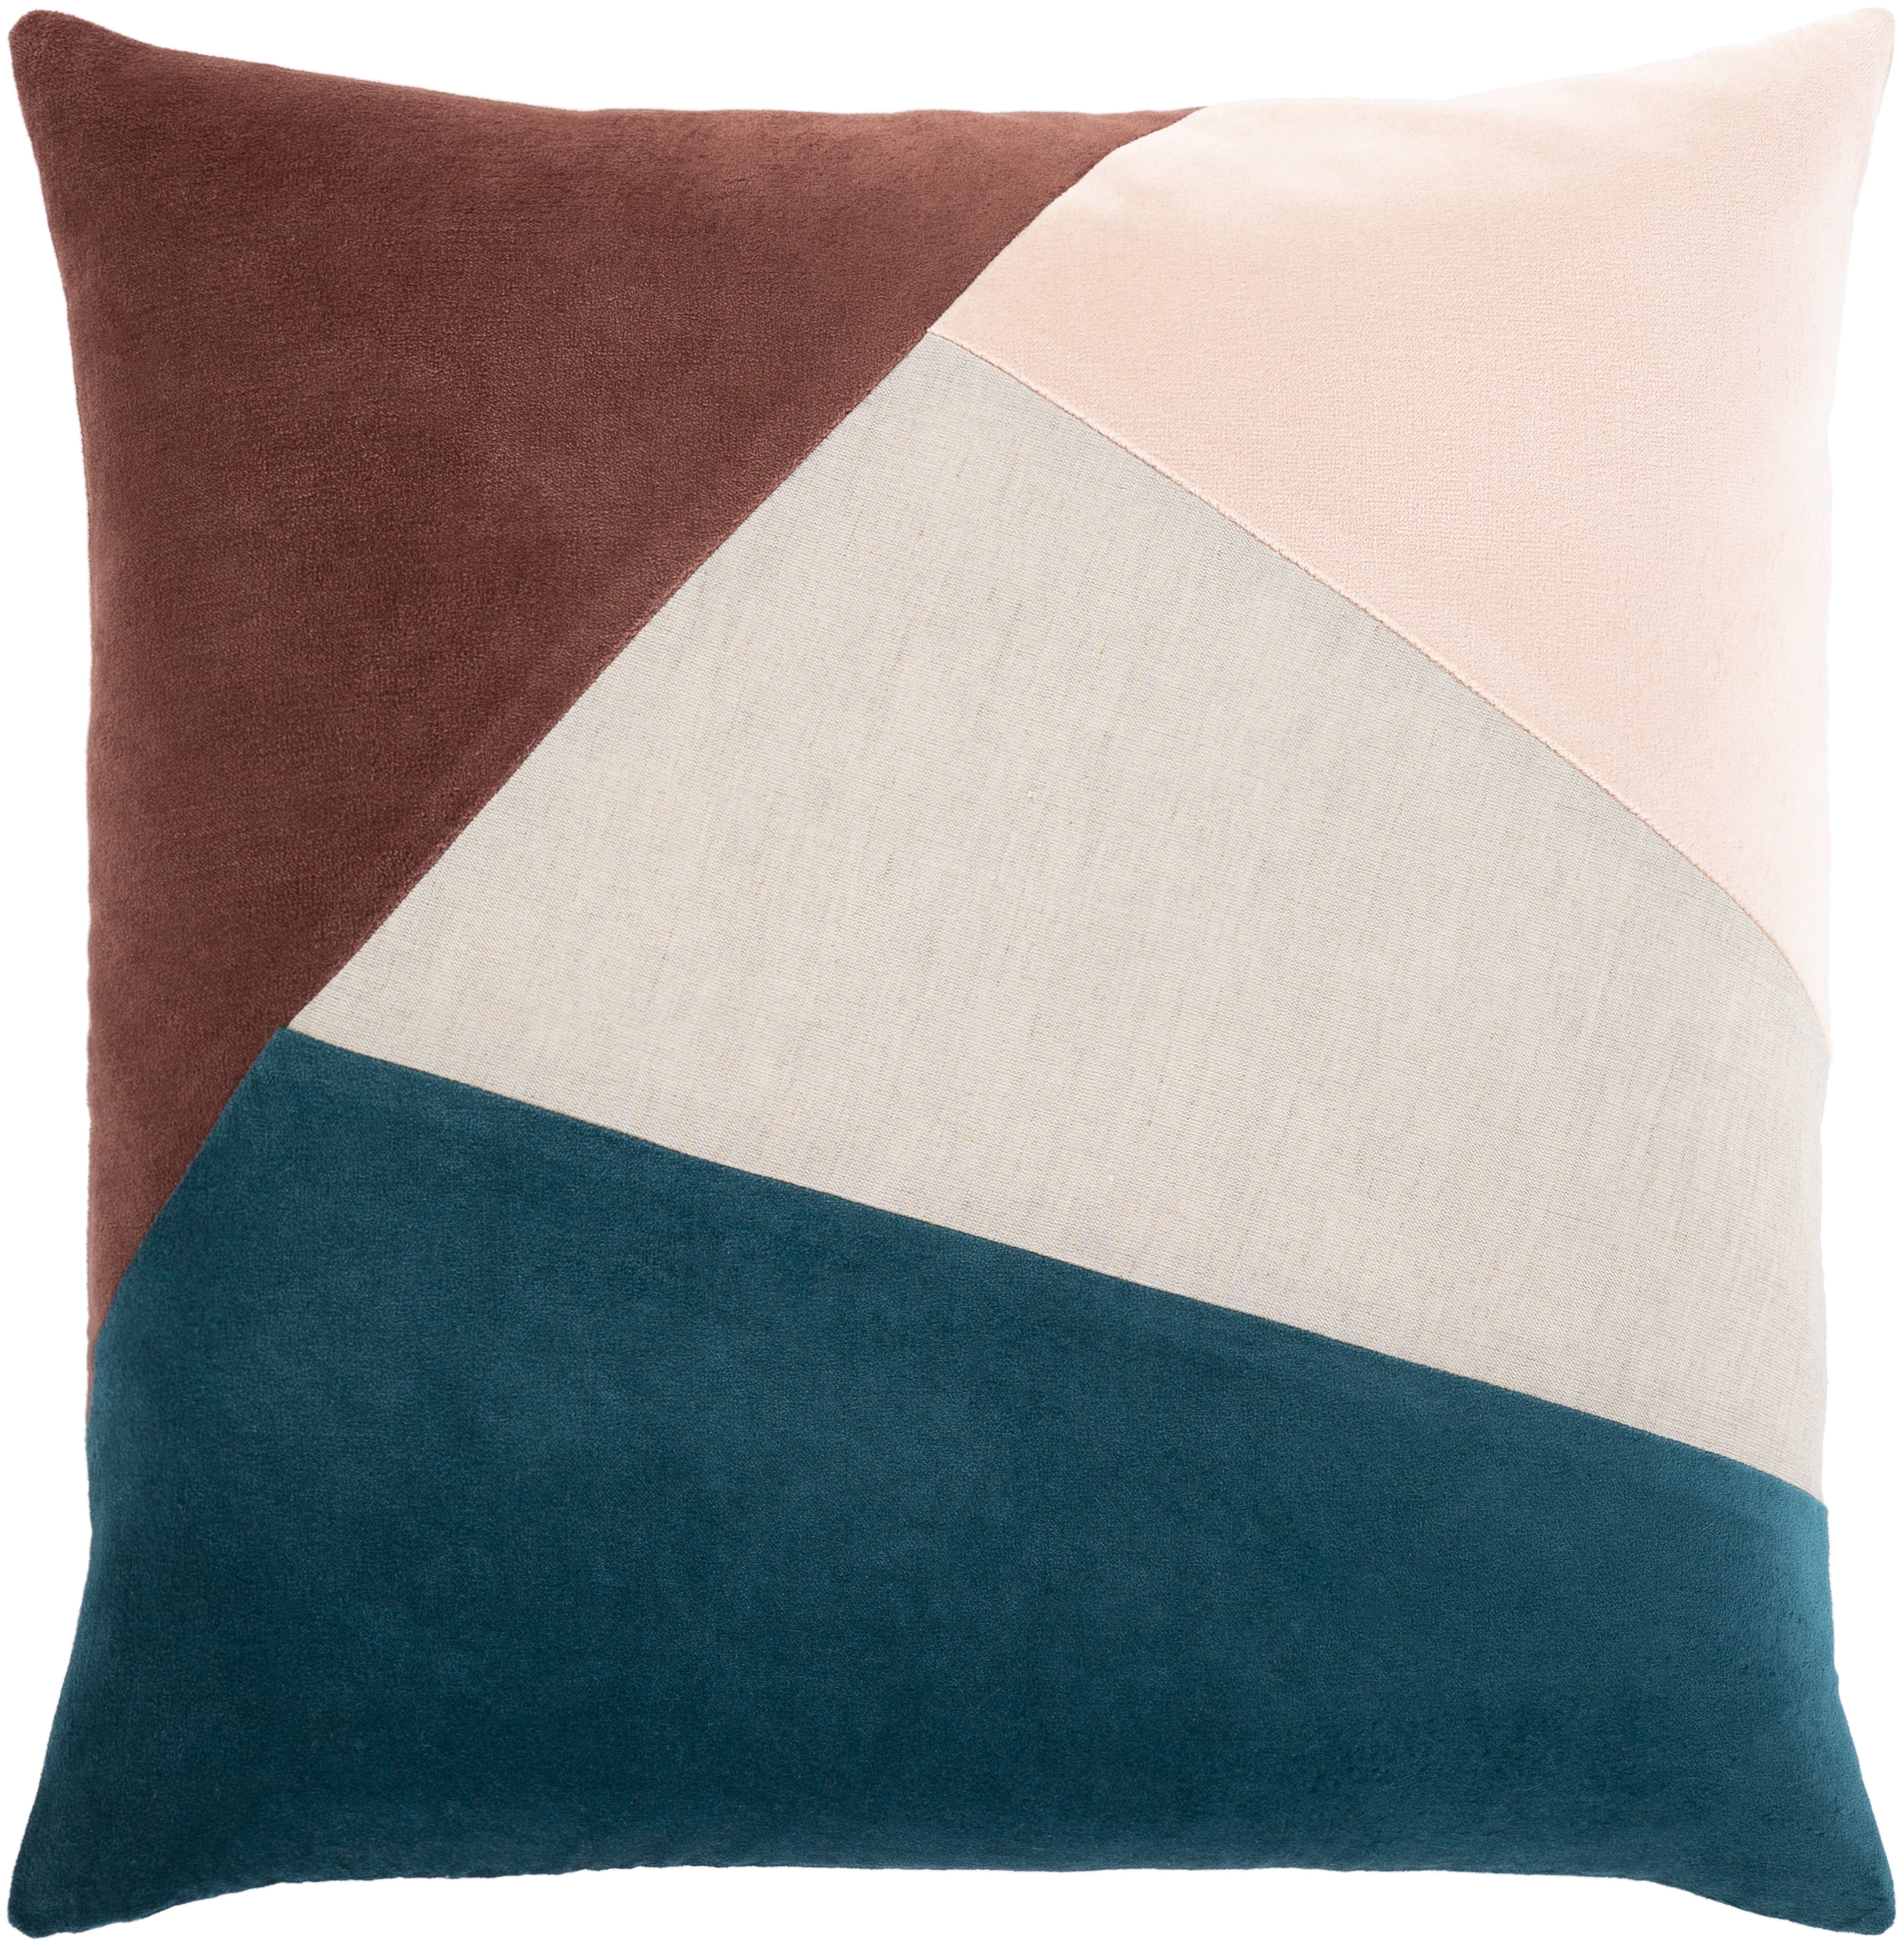 Moza Throw Pillow, 20" x 20", with poly insert - Surya